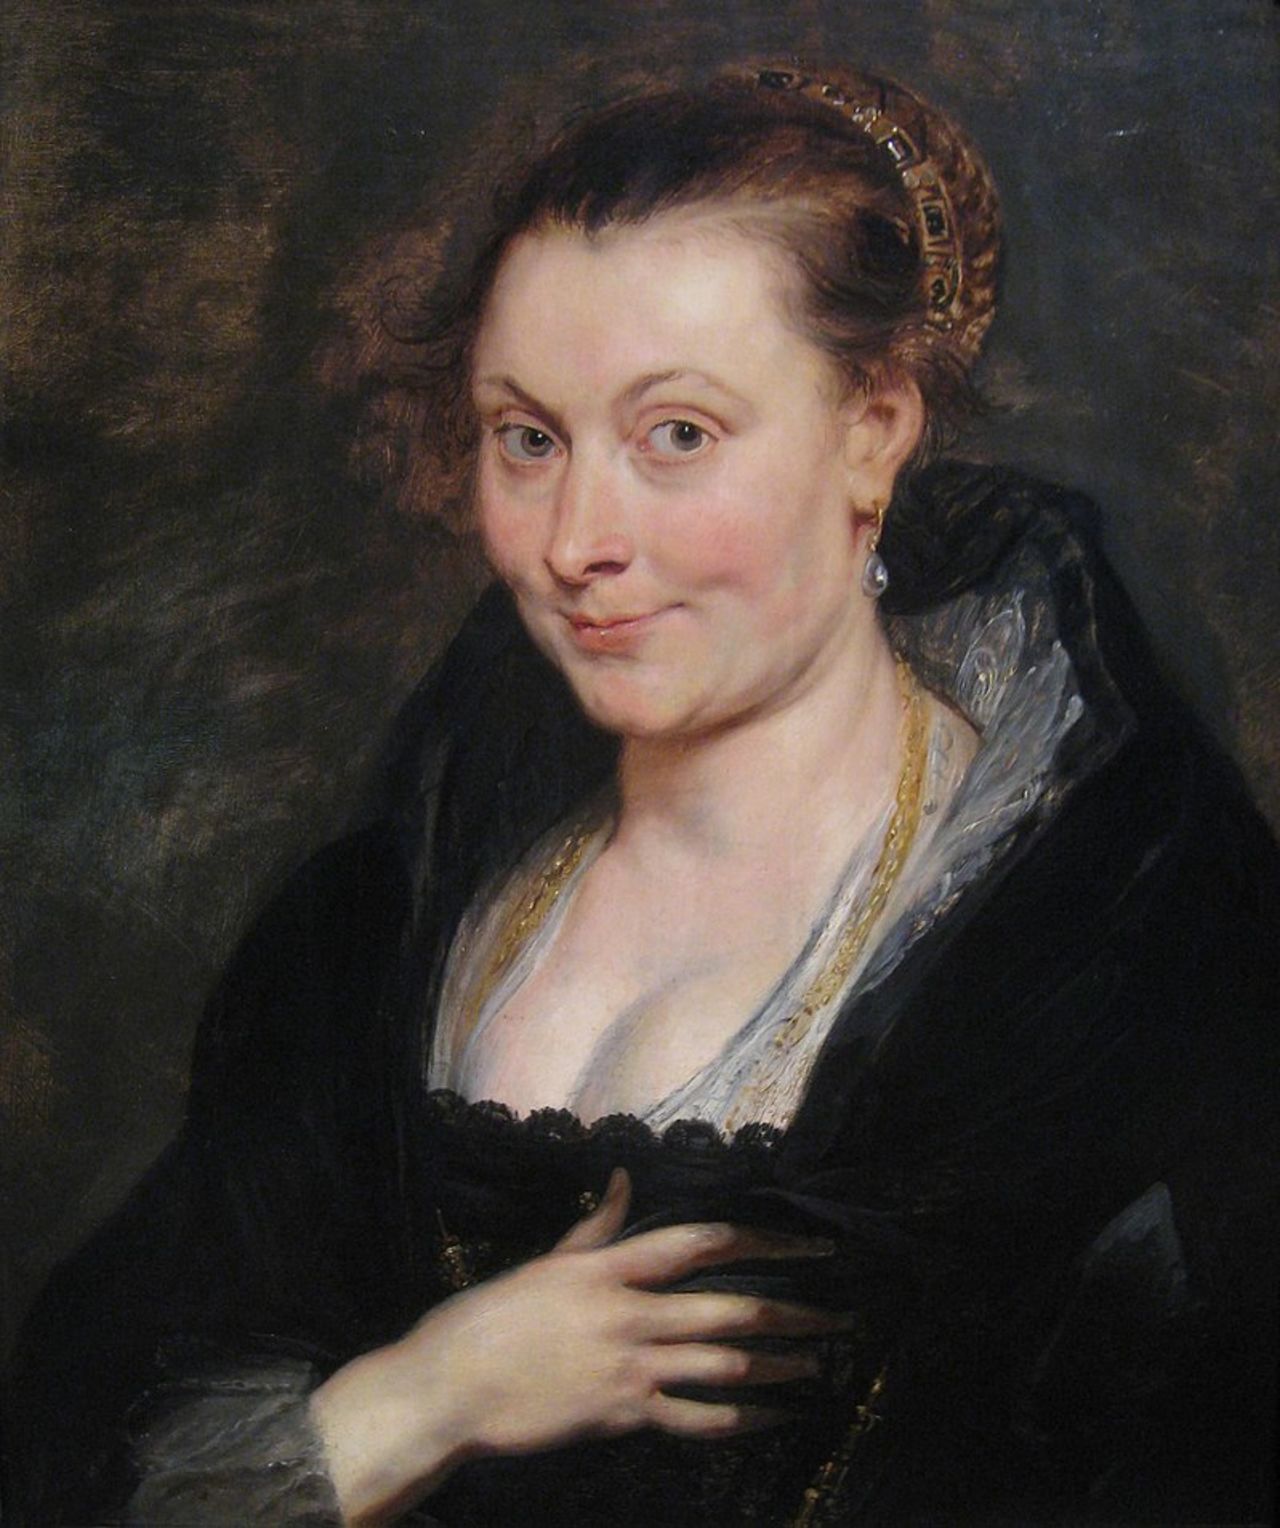 "Portrait of Isabella Brant" (1620-1625) by Peter Paul Rubens